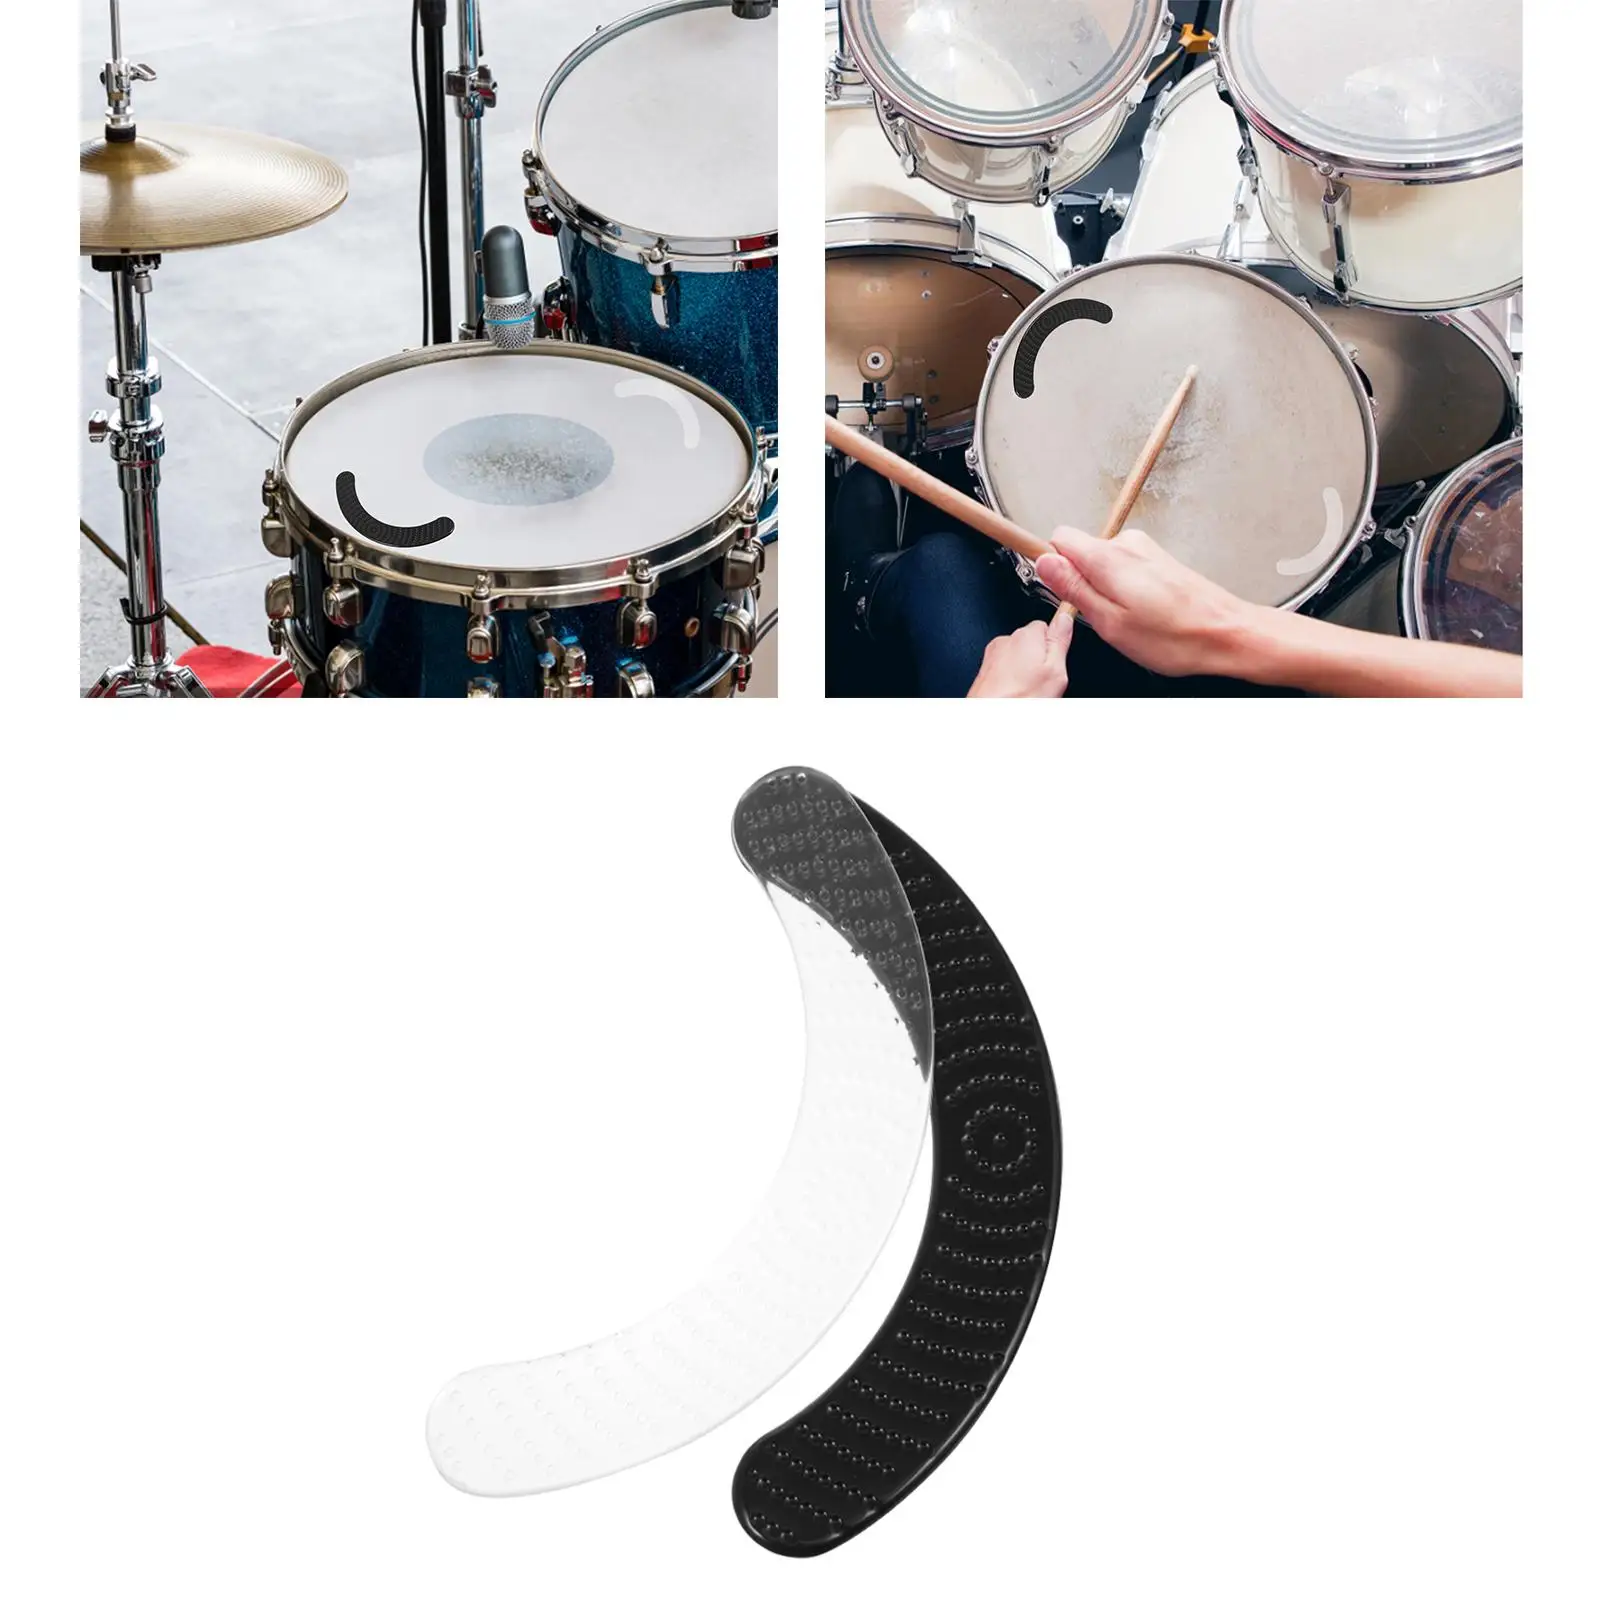 2x Silicone Mute Damper Pads for Snare Drum Reusable Tones Control Practice Pads